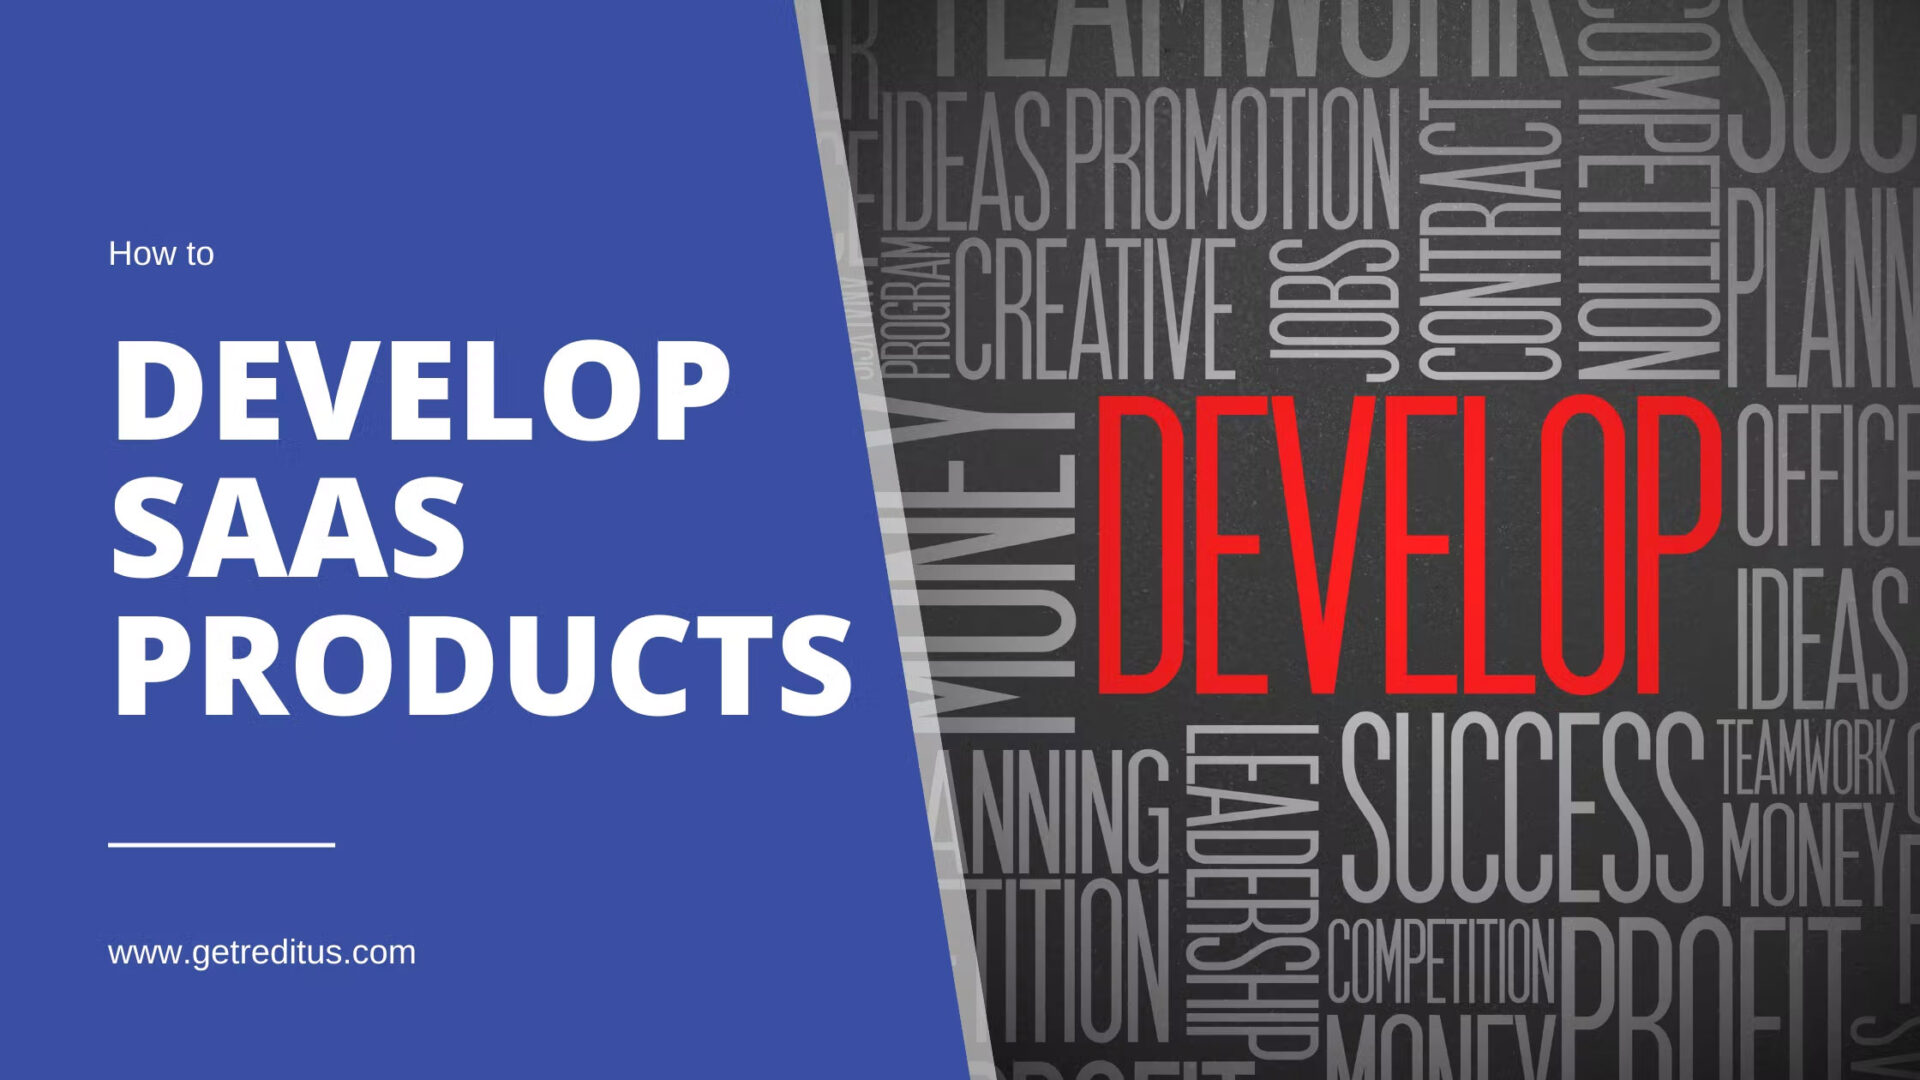 https://www.getreditus.com/blog/how-to-develop-saas-products/